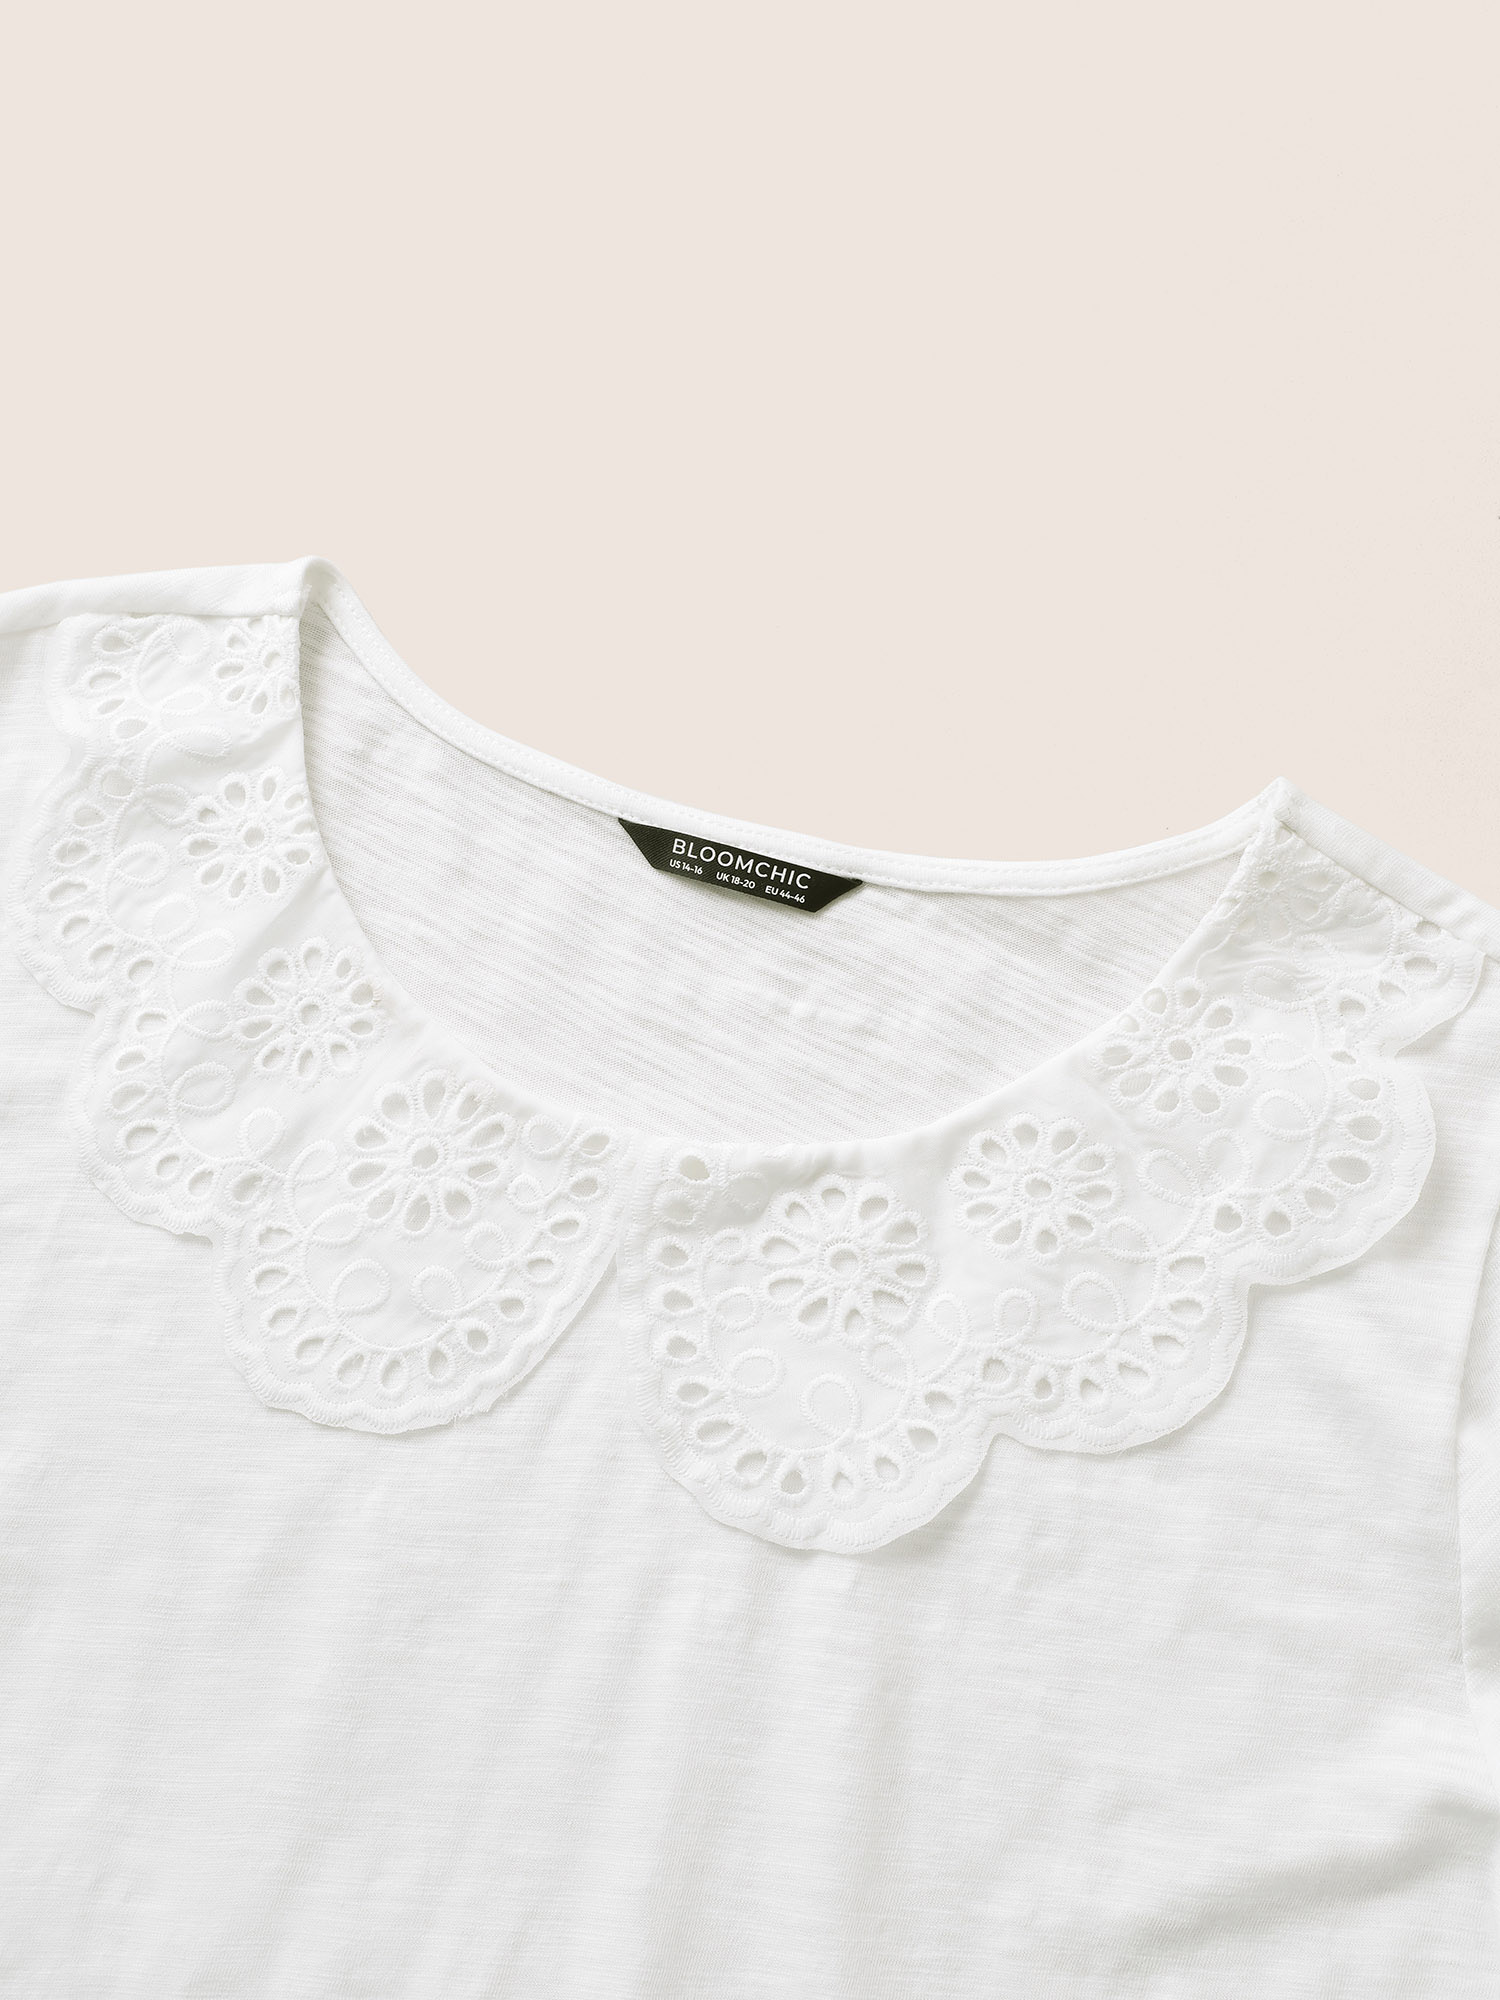 

Plus Size Solid Broderie Anglaise Peter Pan Collar T-shirt White Women Elegant Non Plain Peter Pan Collar Everyday T-shirts BloomChic